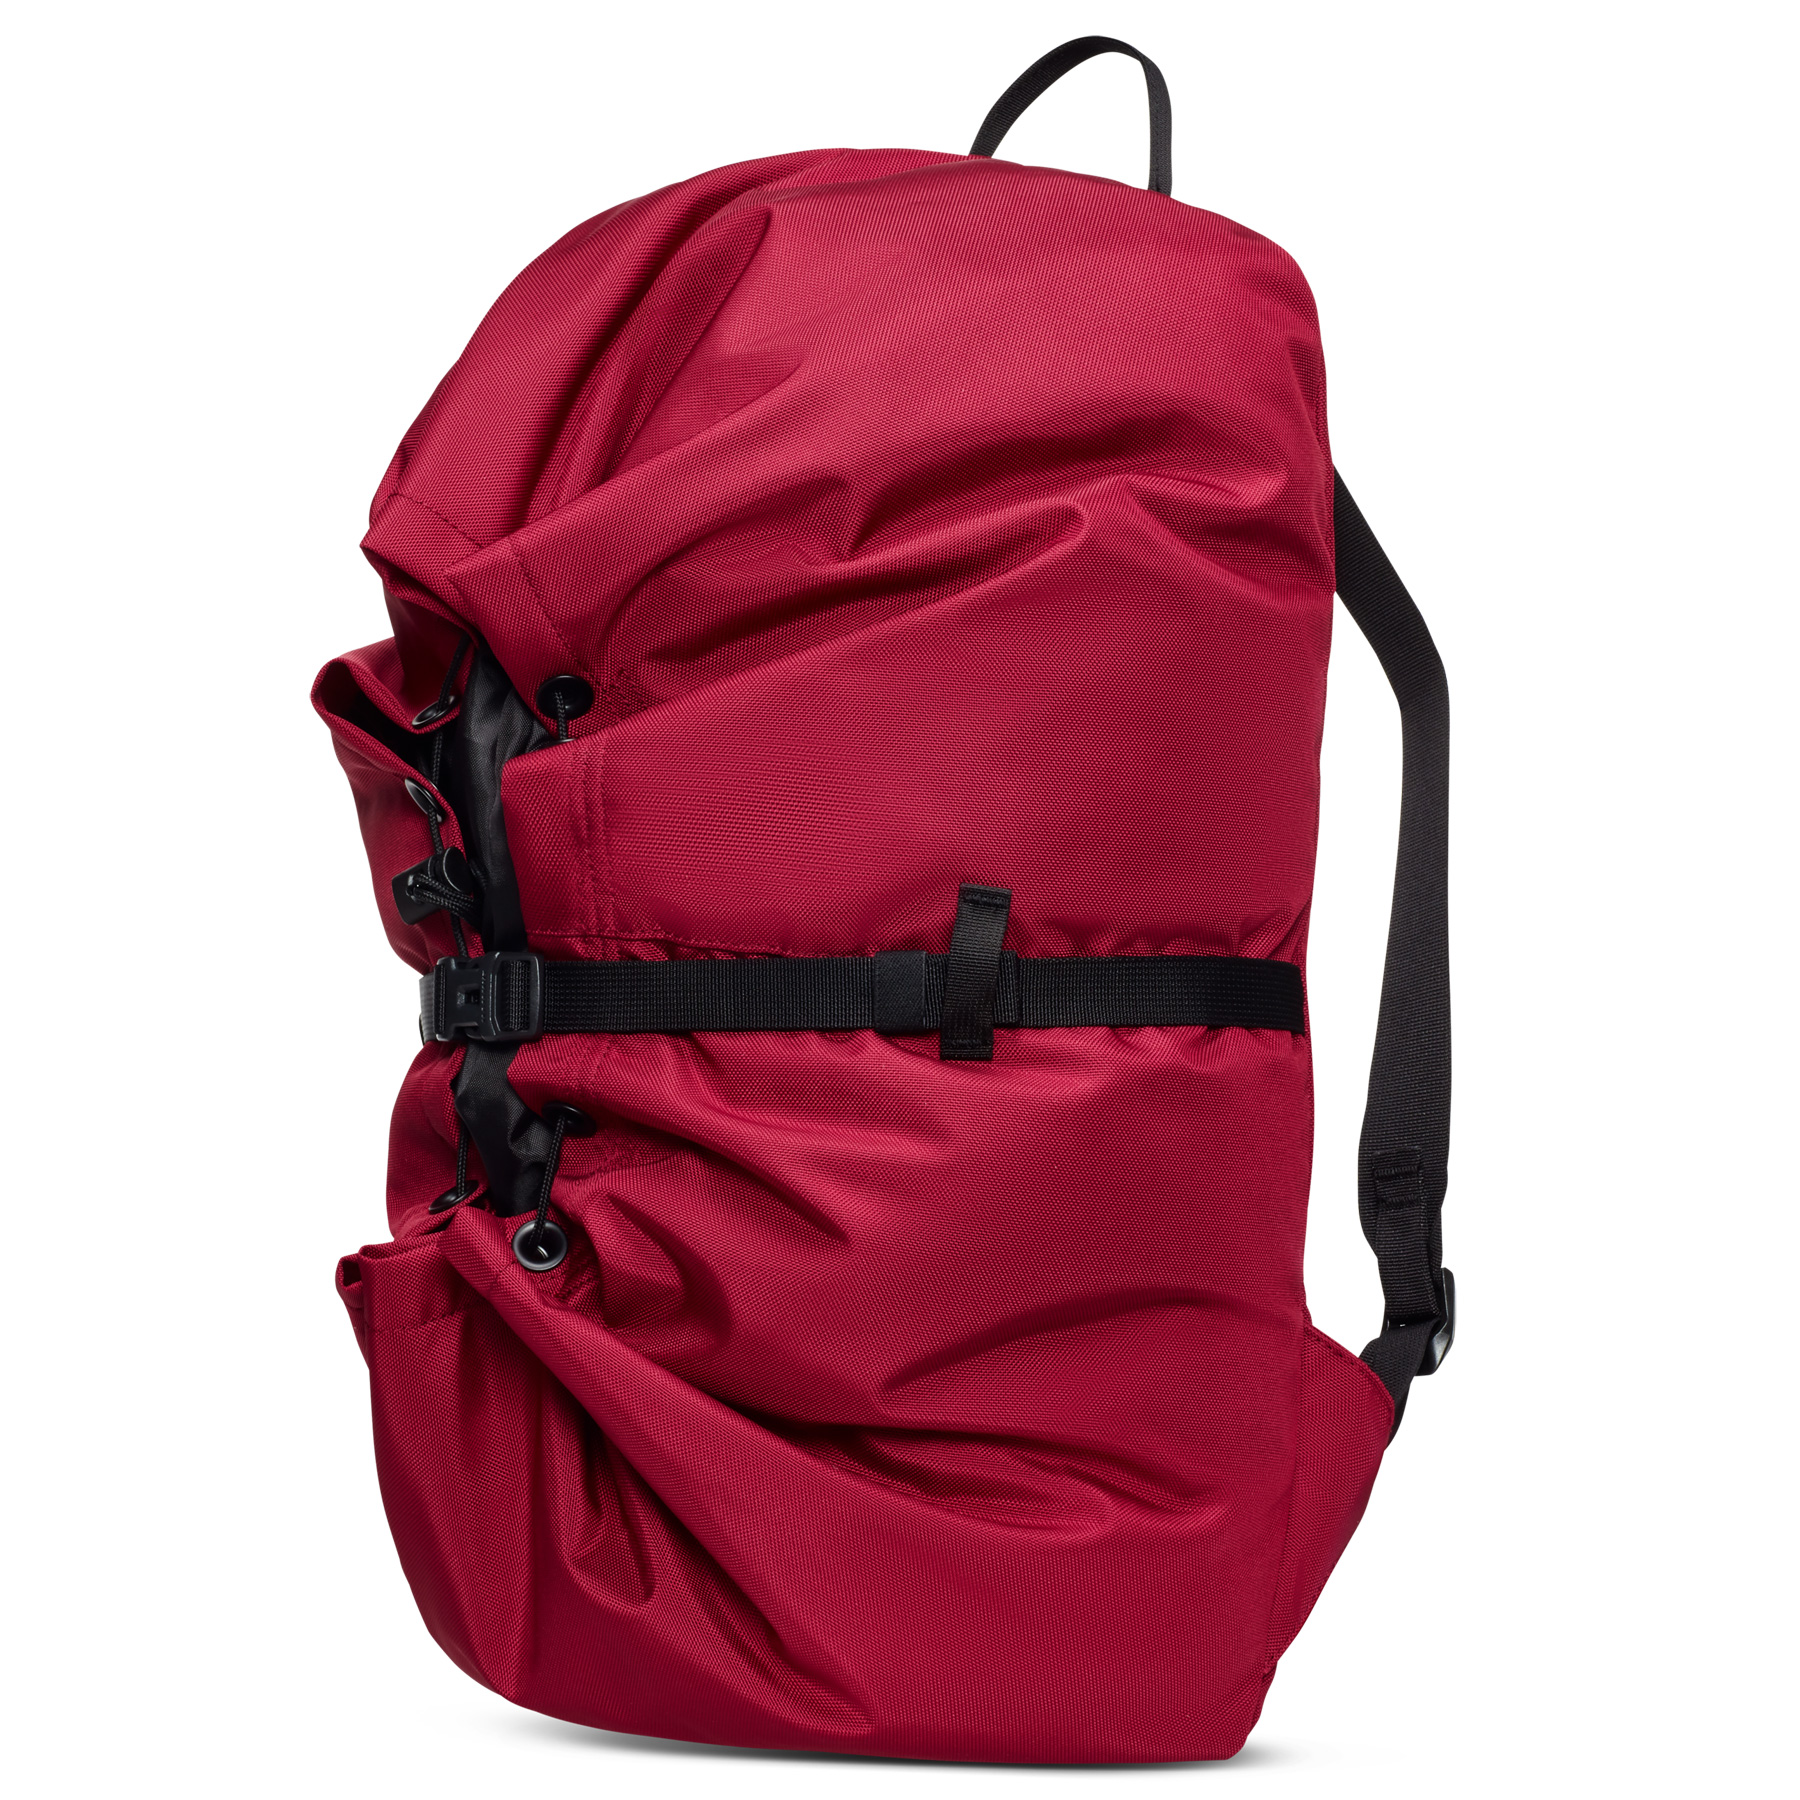 Image of Mammut Neon Rope Bag - blood red